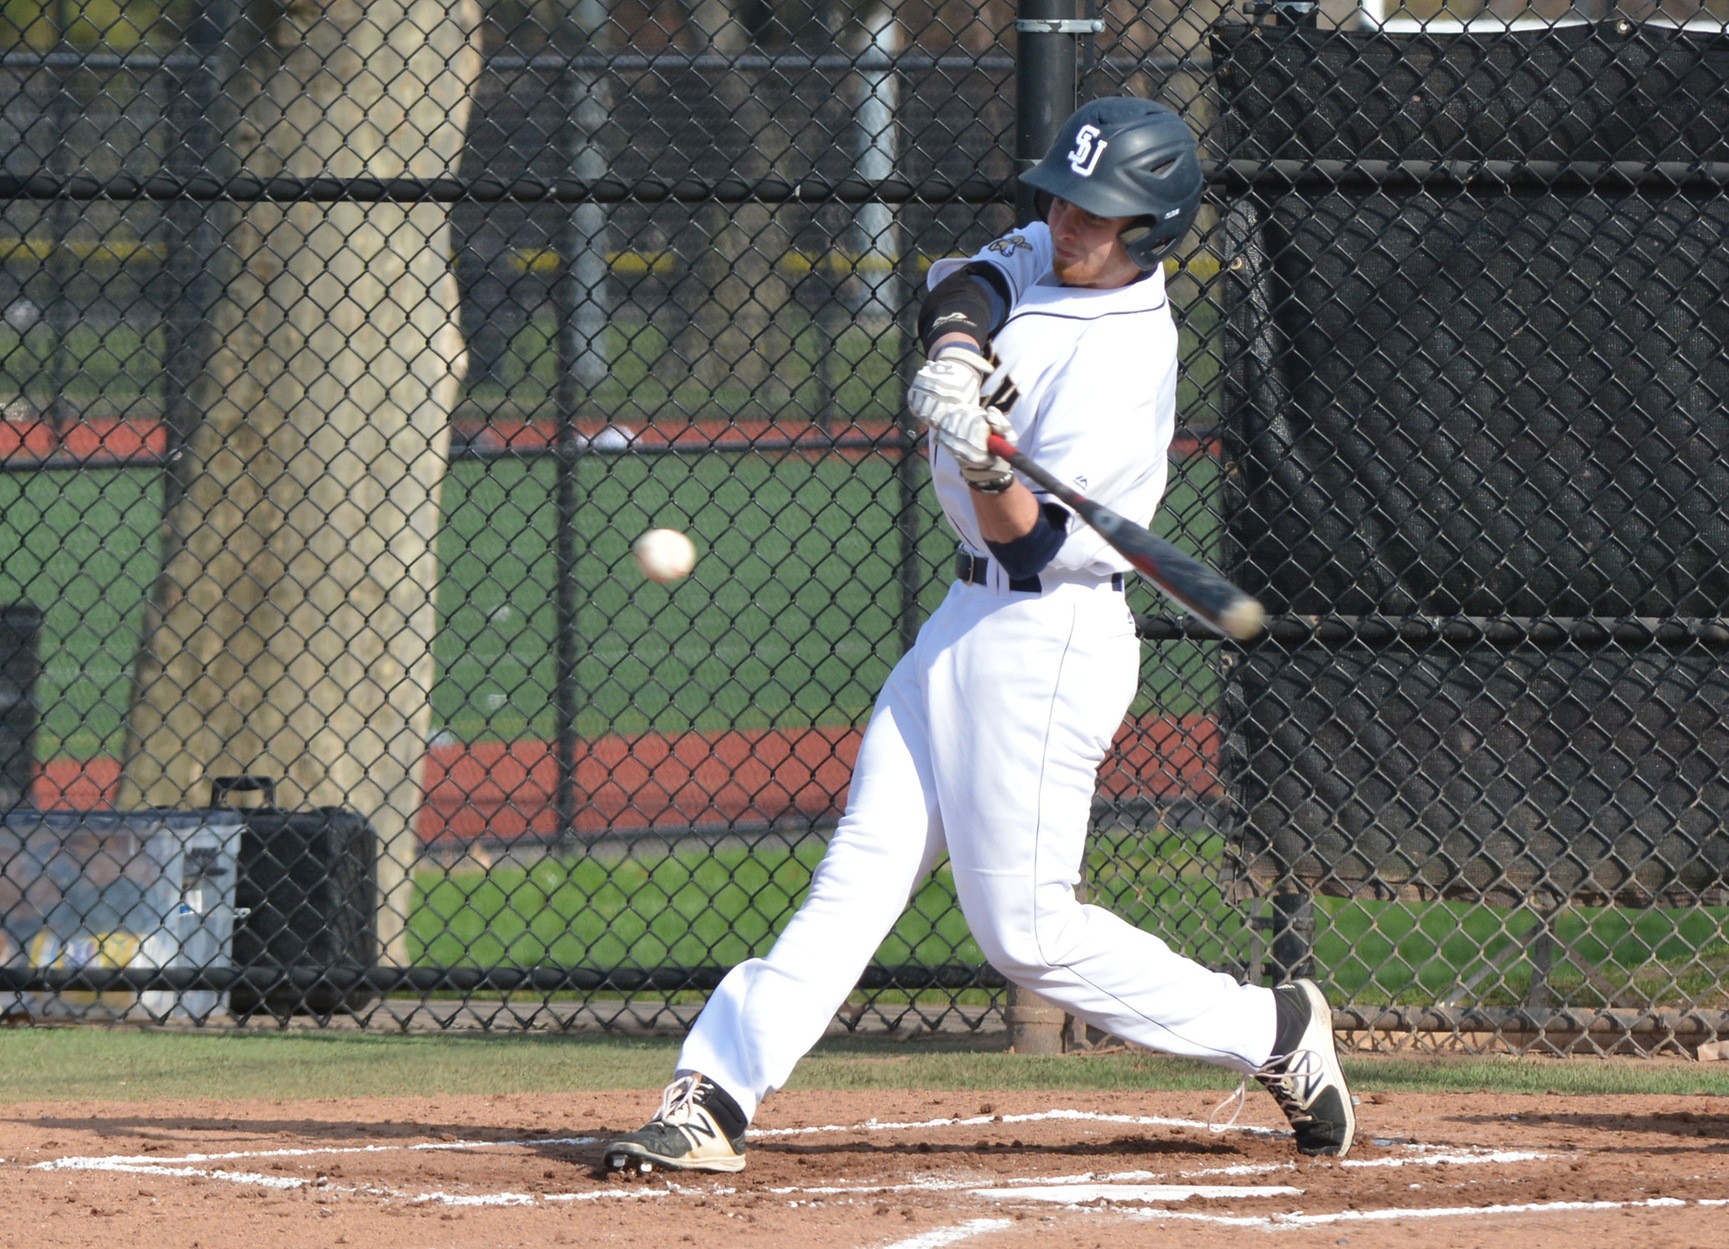 UMass Dartmouth Charges Late to Take Down Baseball 13-8